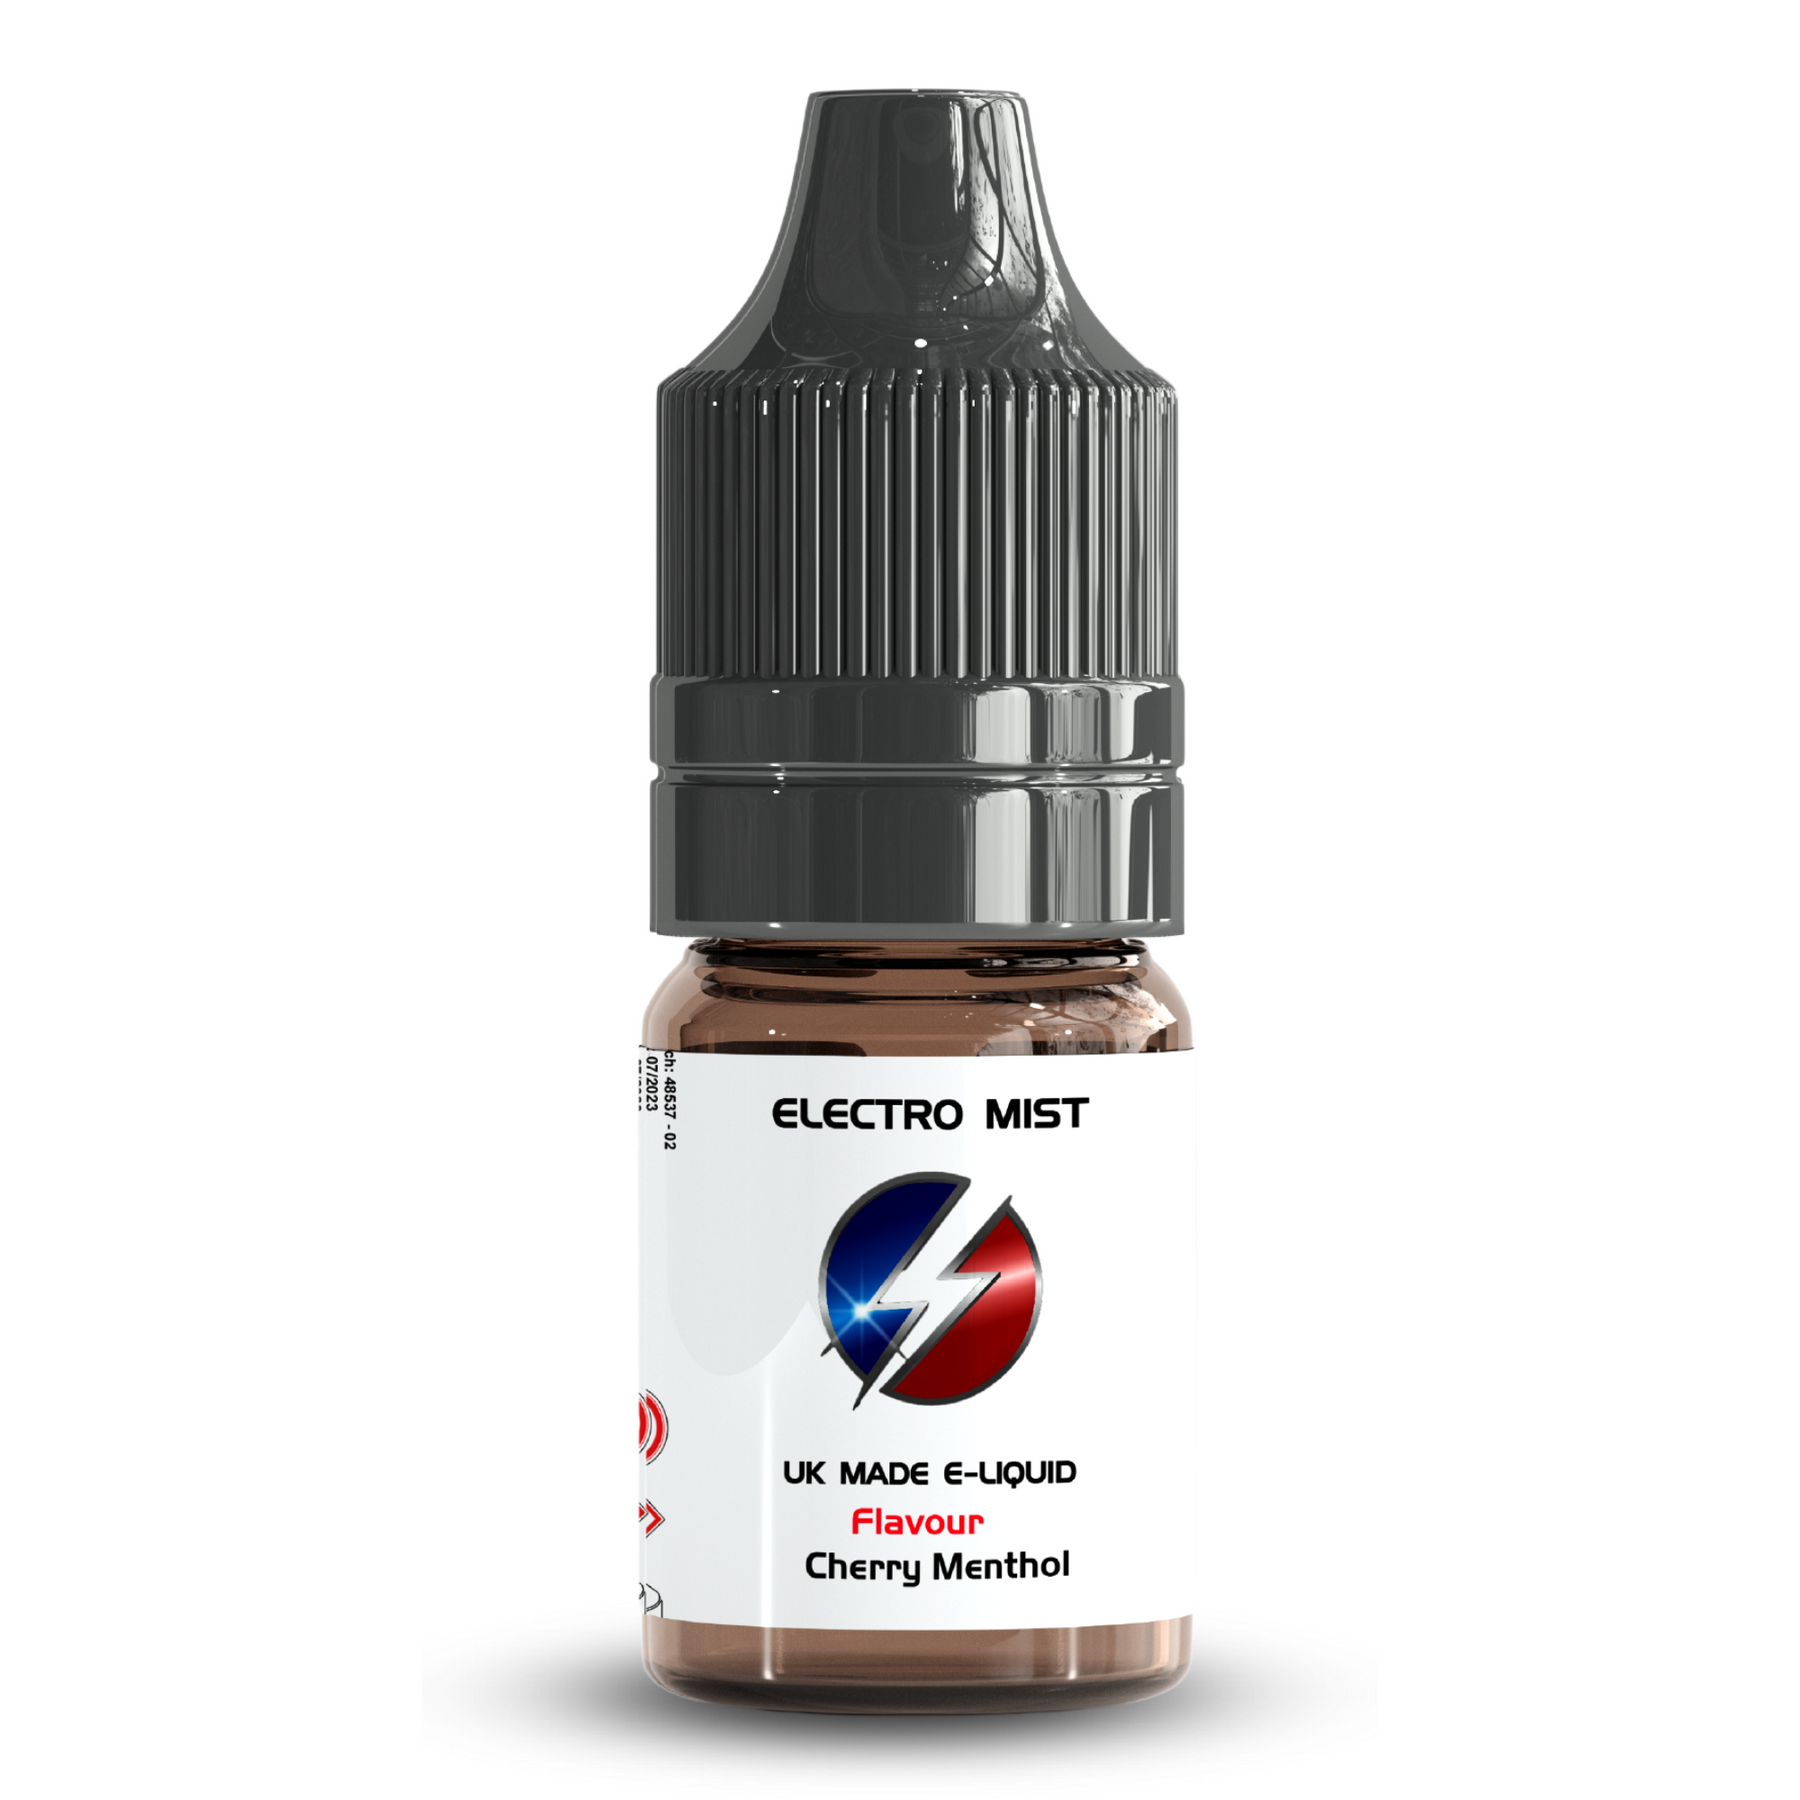 Electromist, the e-liquid brand you can trust. Get your taste buds ready for a flavour sensation, Cherry Menthol. Nicotine Content: 3mg/6mg/12mg. Products may contain nicotine. For over 18s Only ejuice, vape pen, eliquid, e cigarette, 10ml, vaping, cloud, PG, VG, 60/40, vape liquid, Flavour